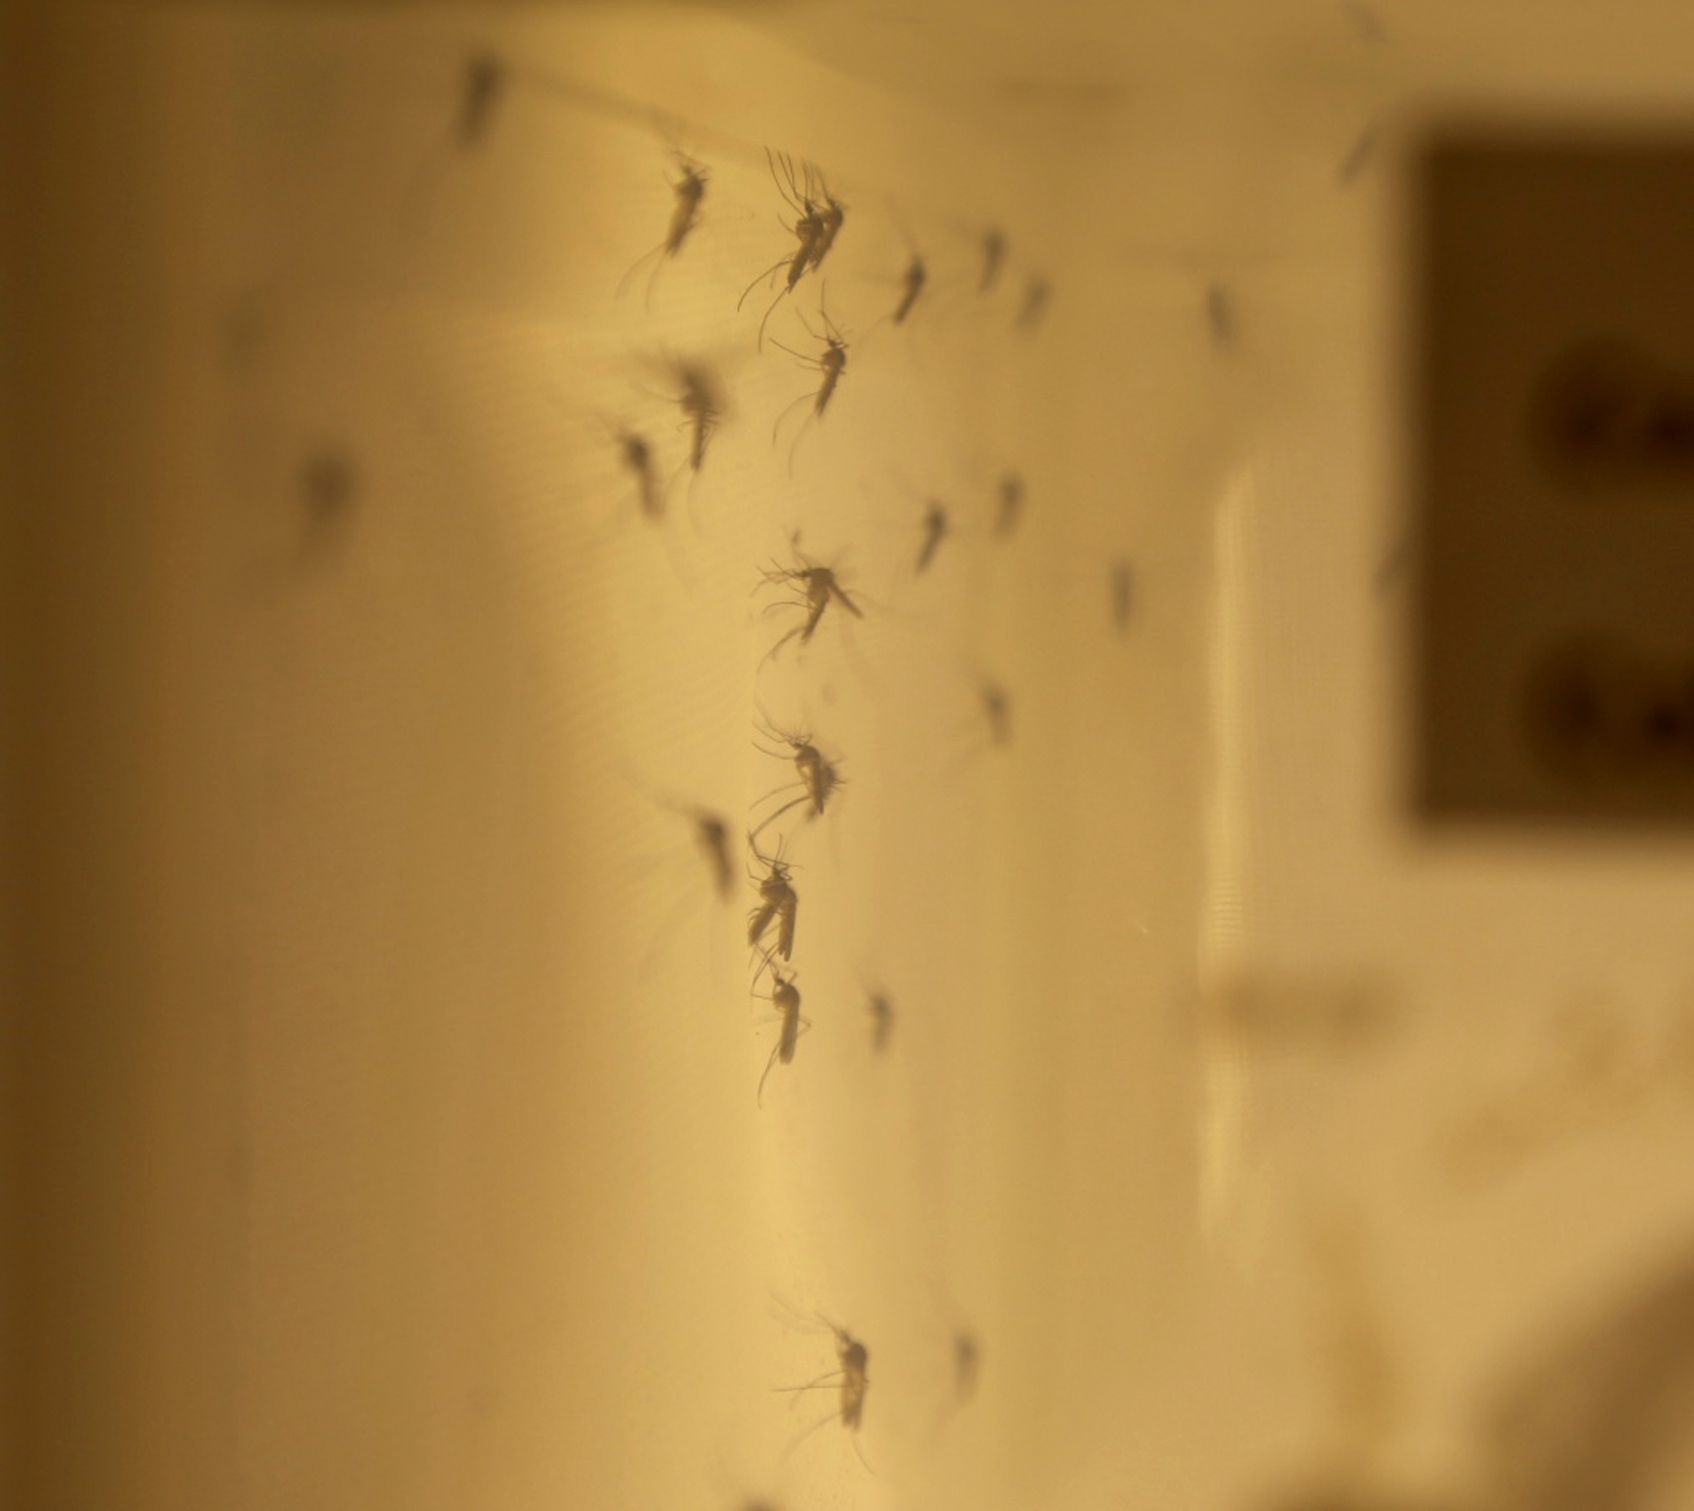 Health Canada photo of a colony of adult Culiseta inornata mosquitoes tested for Zika transmission at the National Microbiology Laboratory